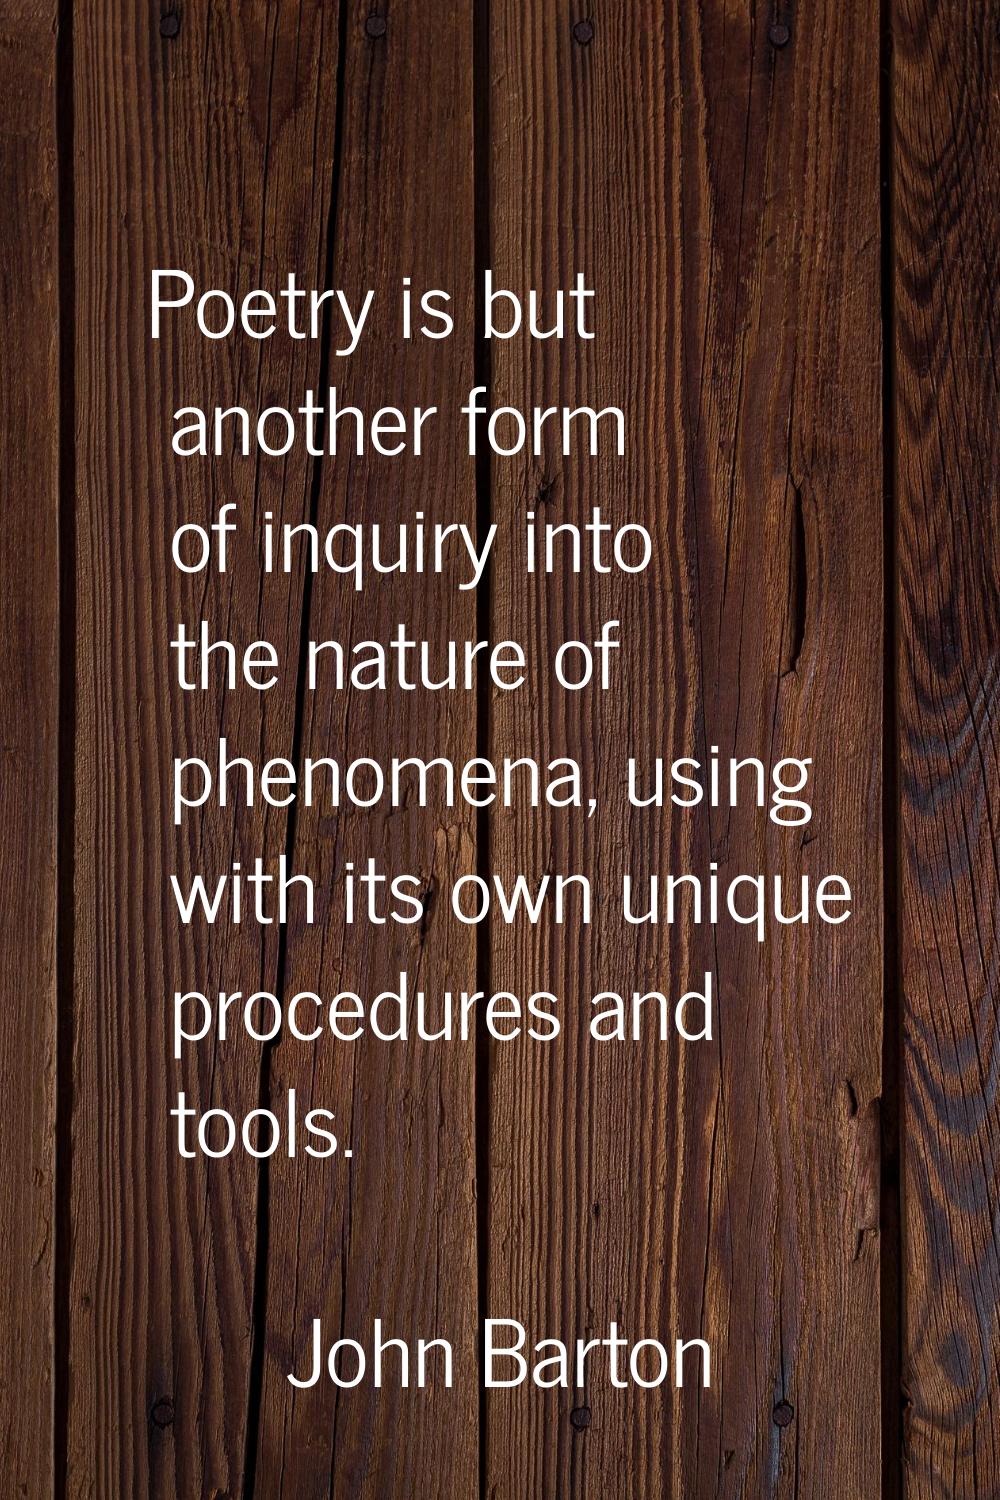 Poetry is but another form of inquiry into the nature of phenomena, using with its own unique proce